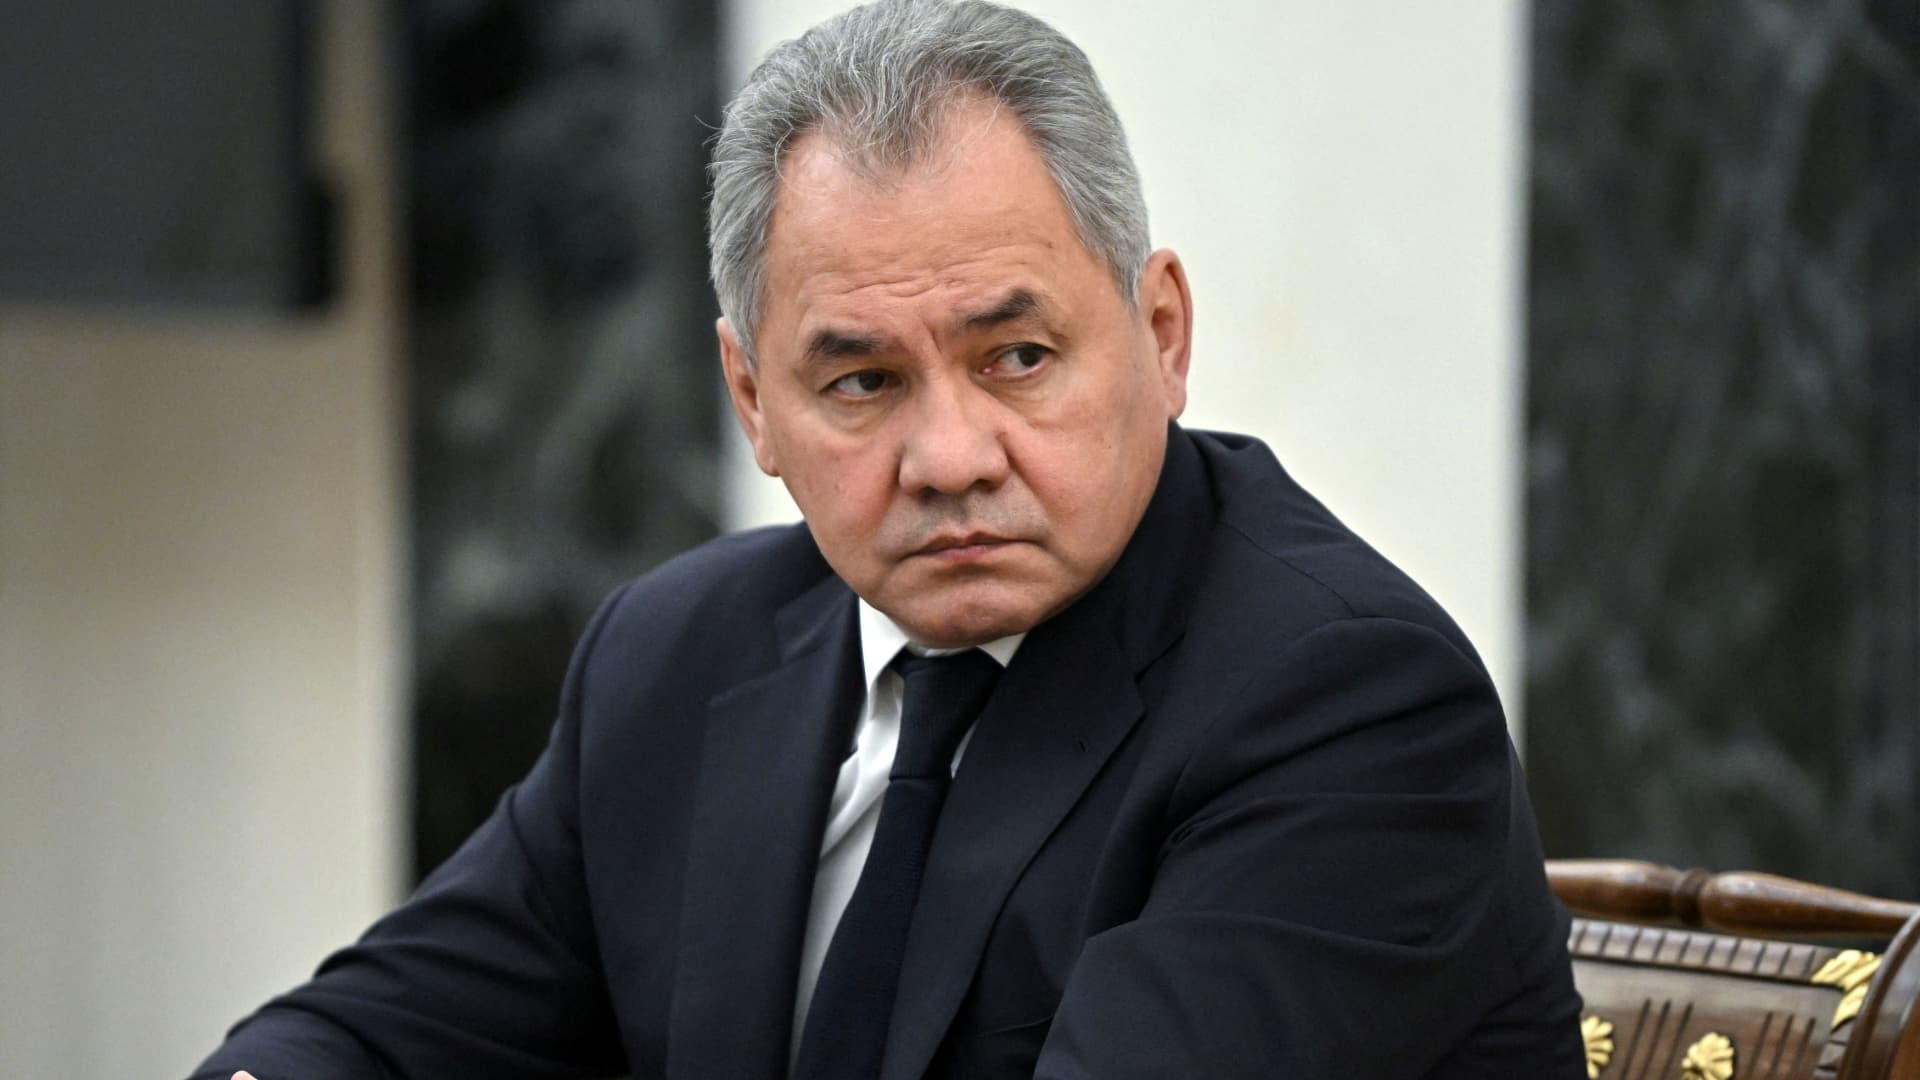 Russian Defence Minister Sergei Shoigu attends a meeting with Russian President Vladimir Putin in Moscow, Russia February 14, 2022.